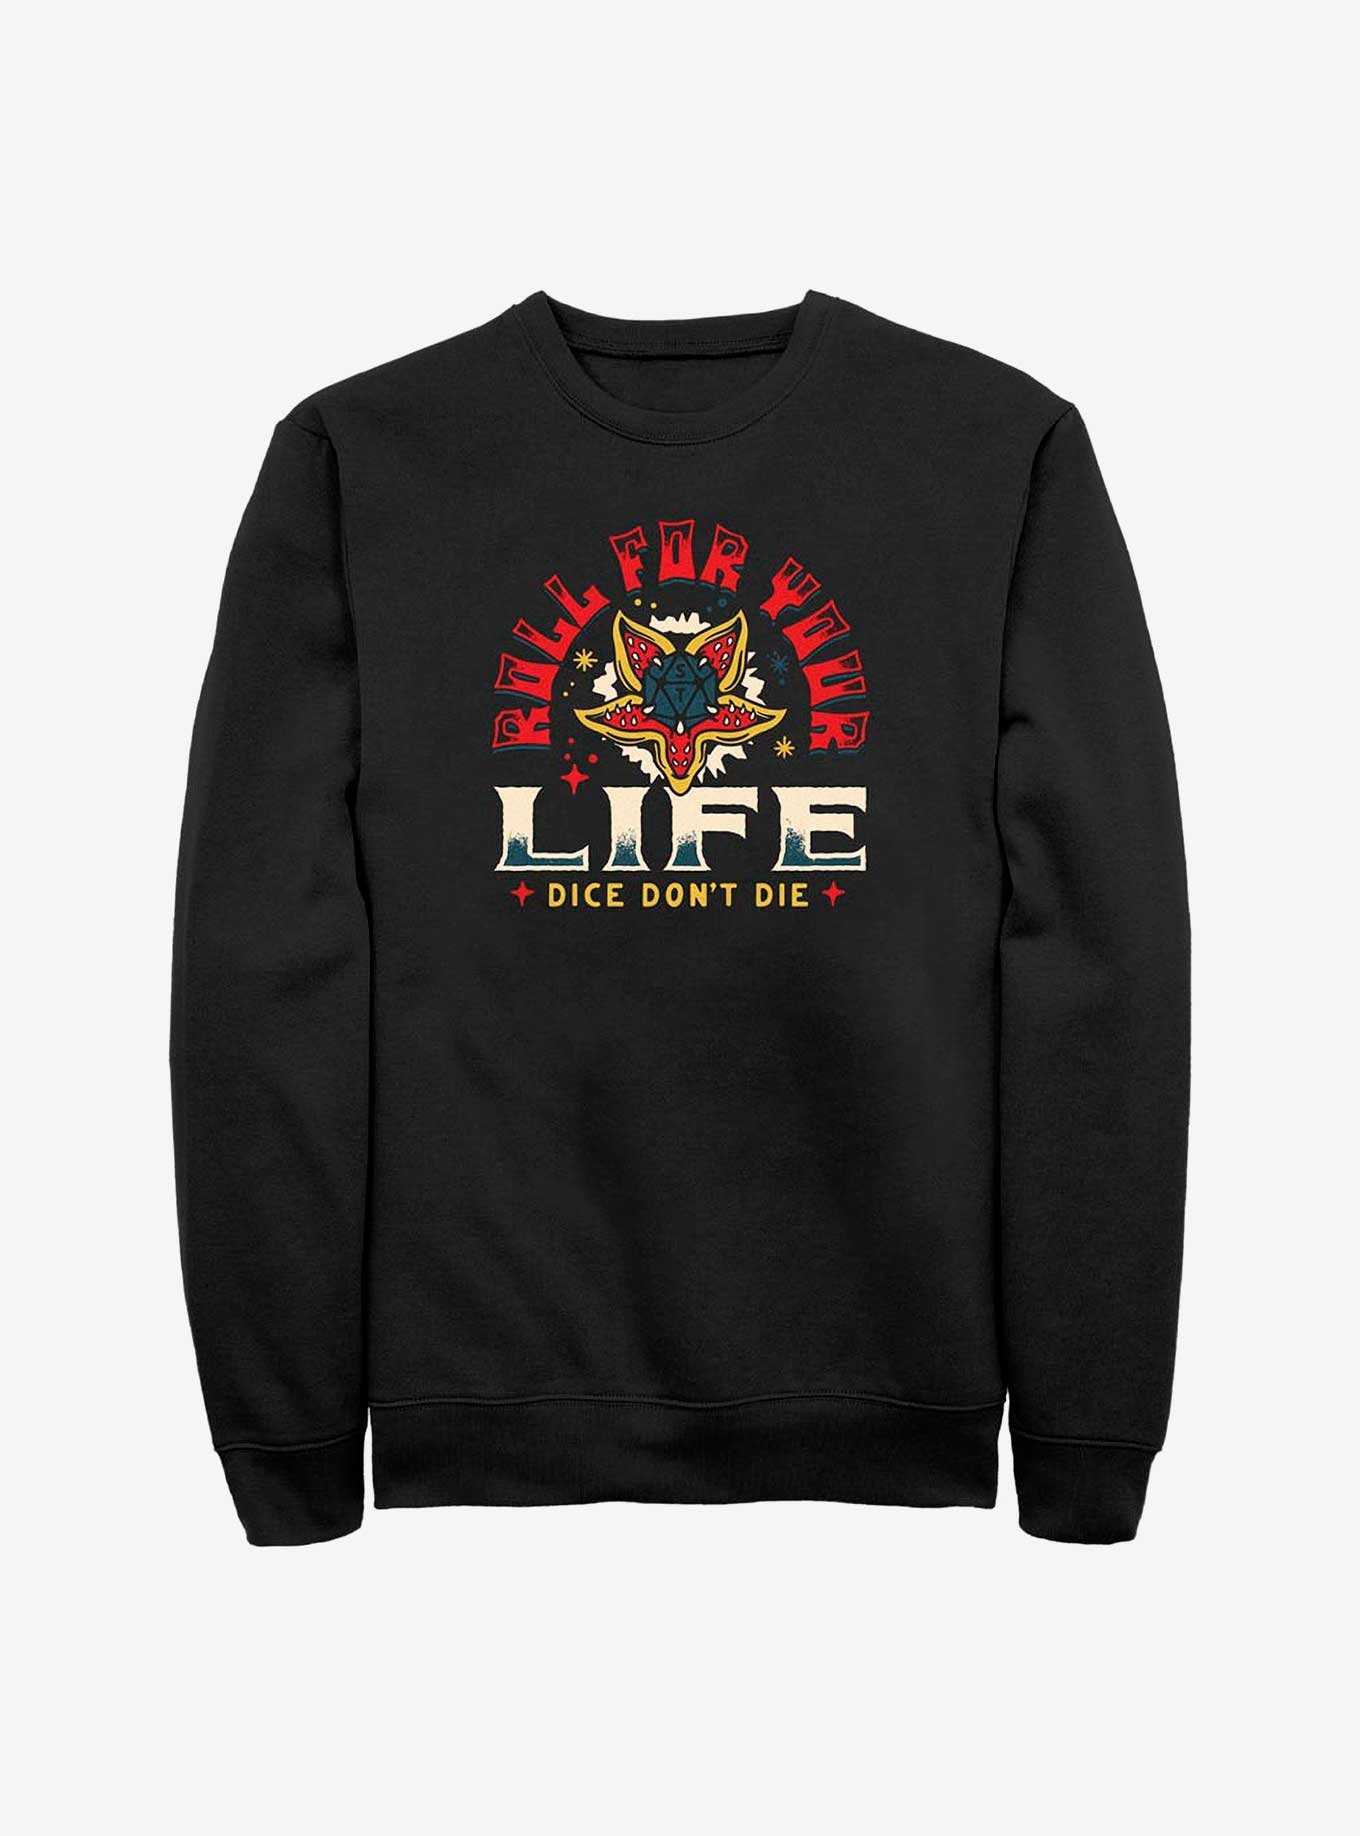 Stranger Things Roll For Your Life Sweatshirt, , hi-res